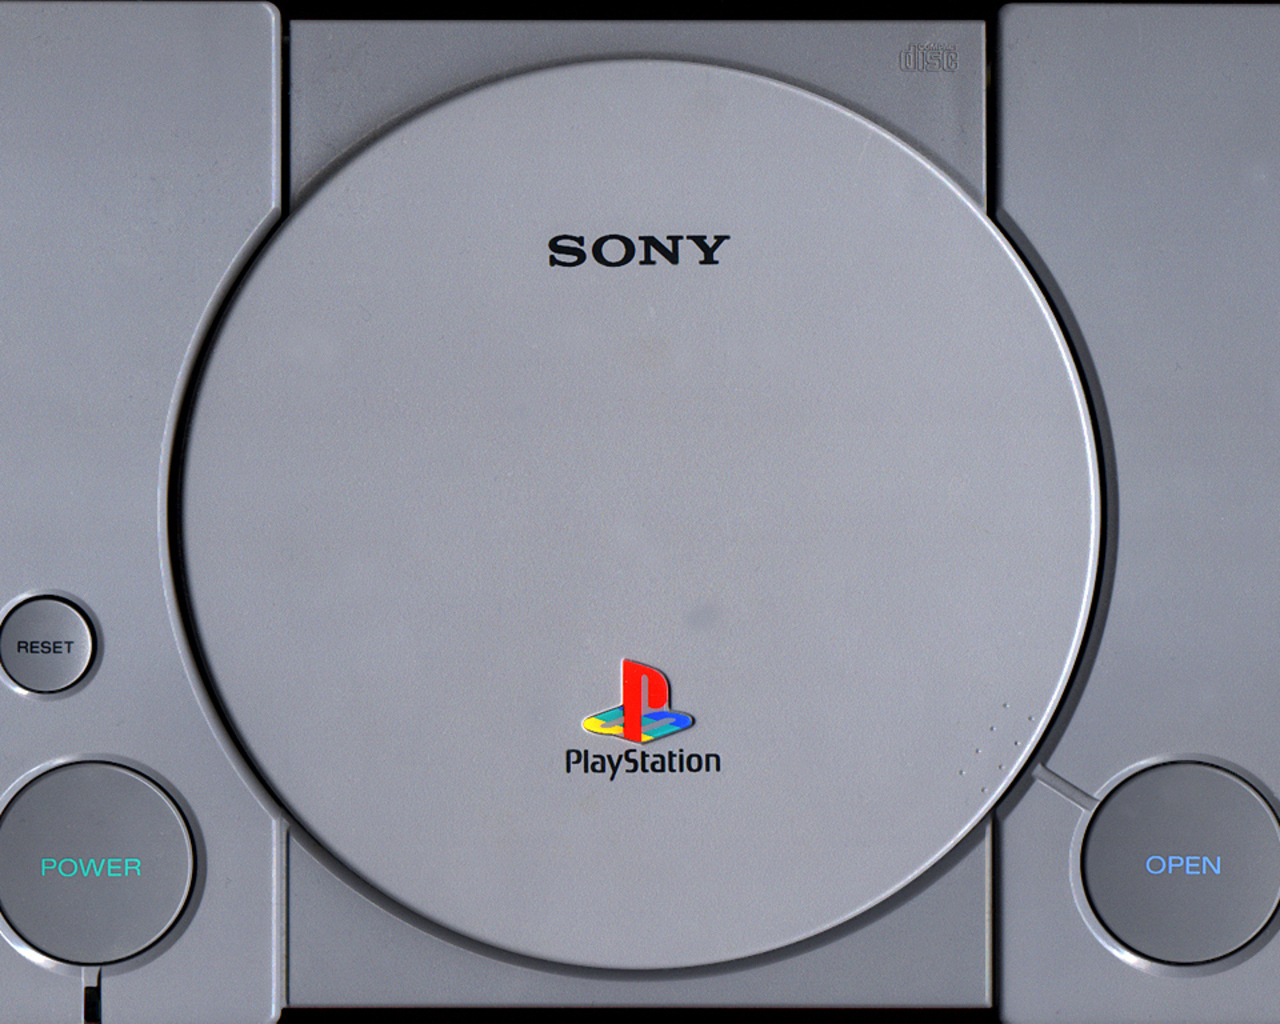 PS1 images The Playstation wallpaper photos 3148301 1280x1024